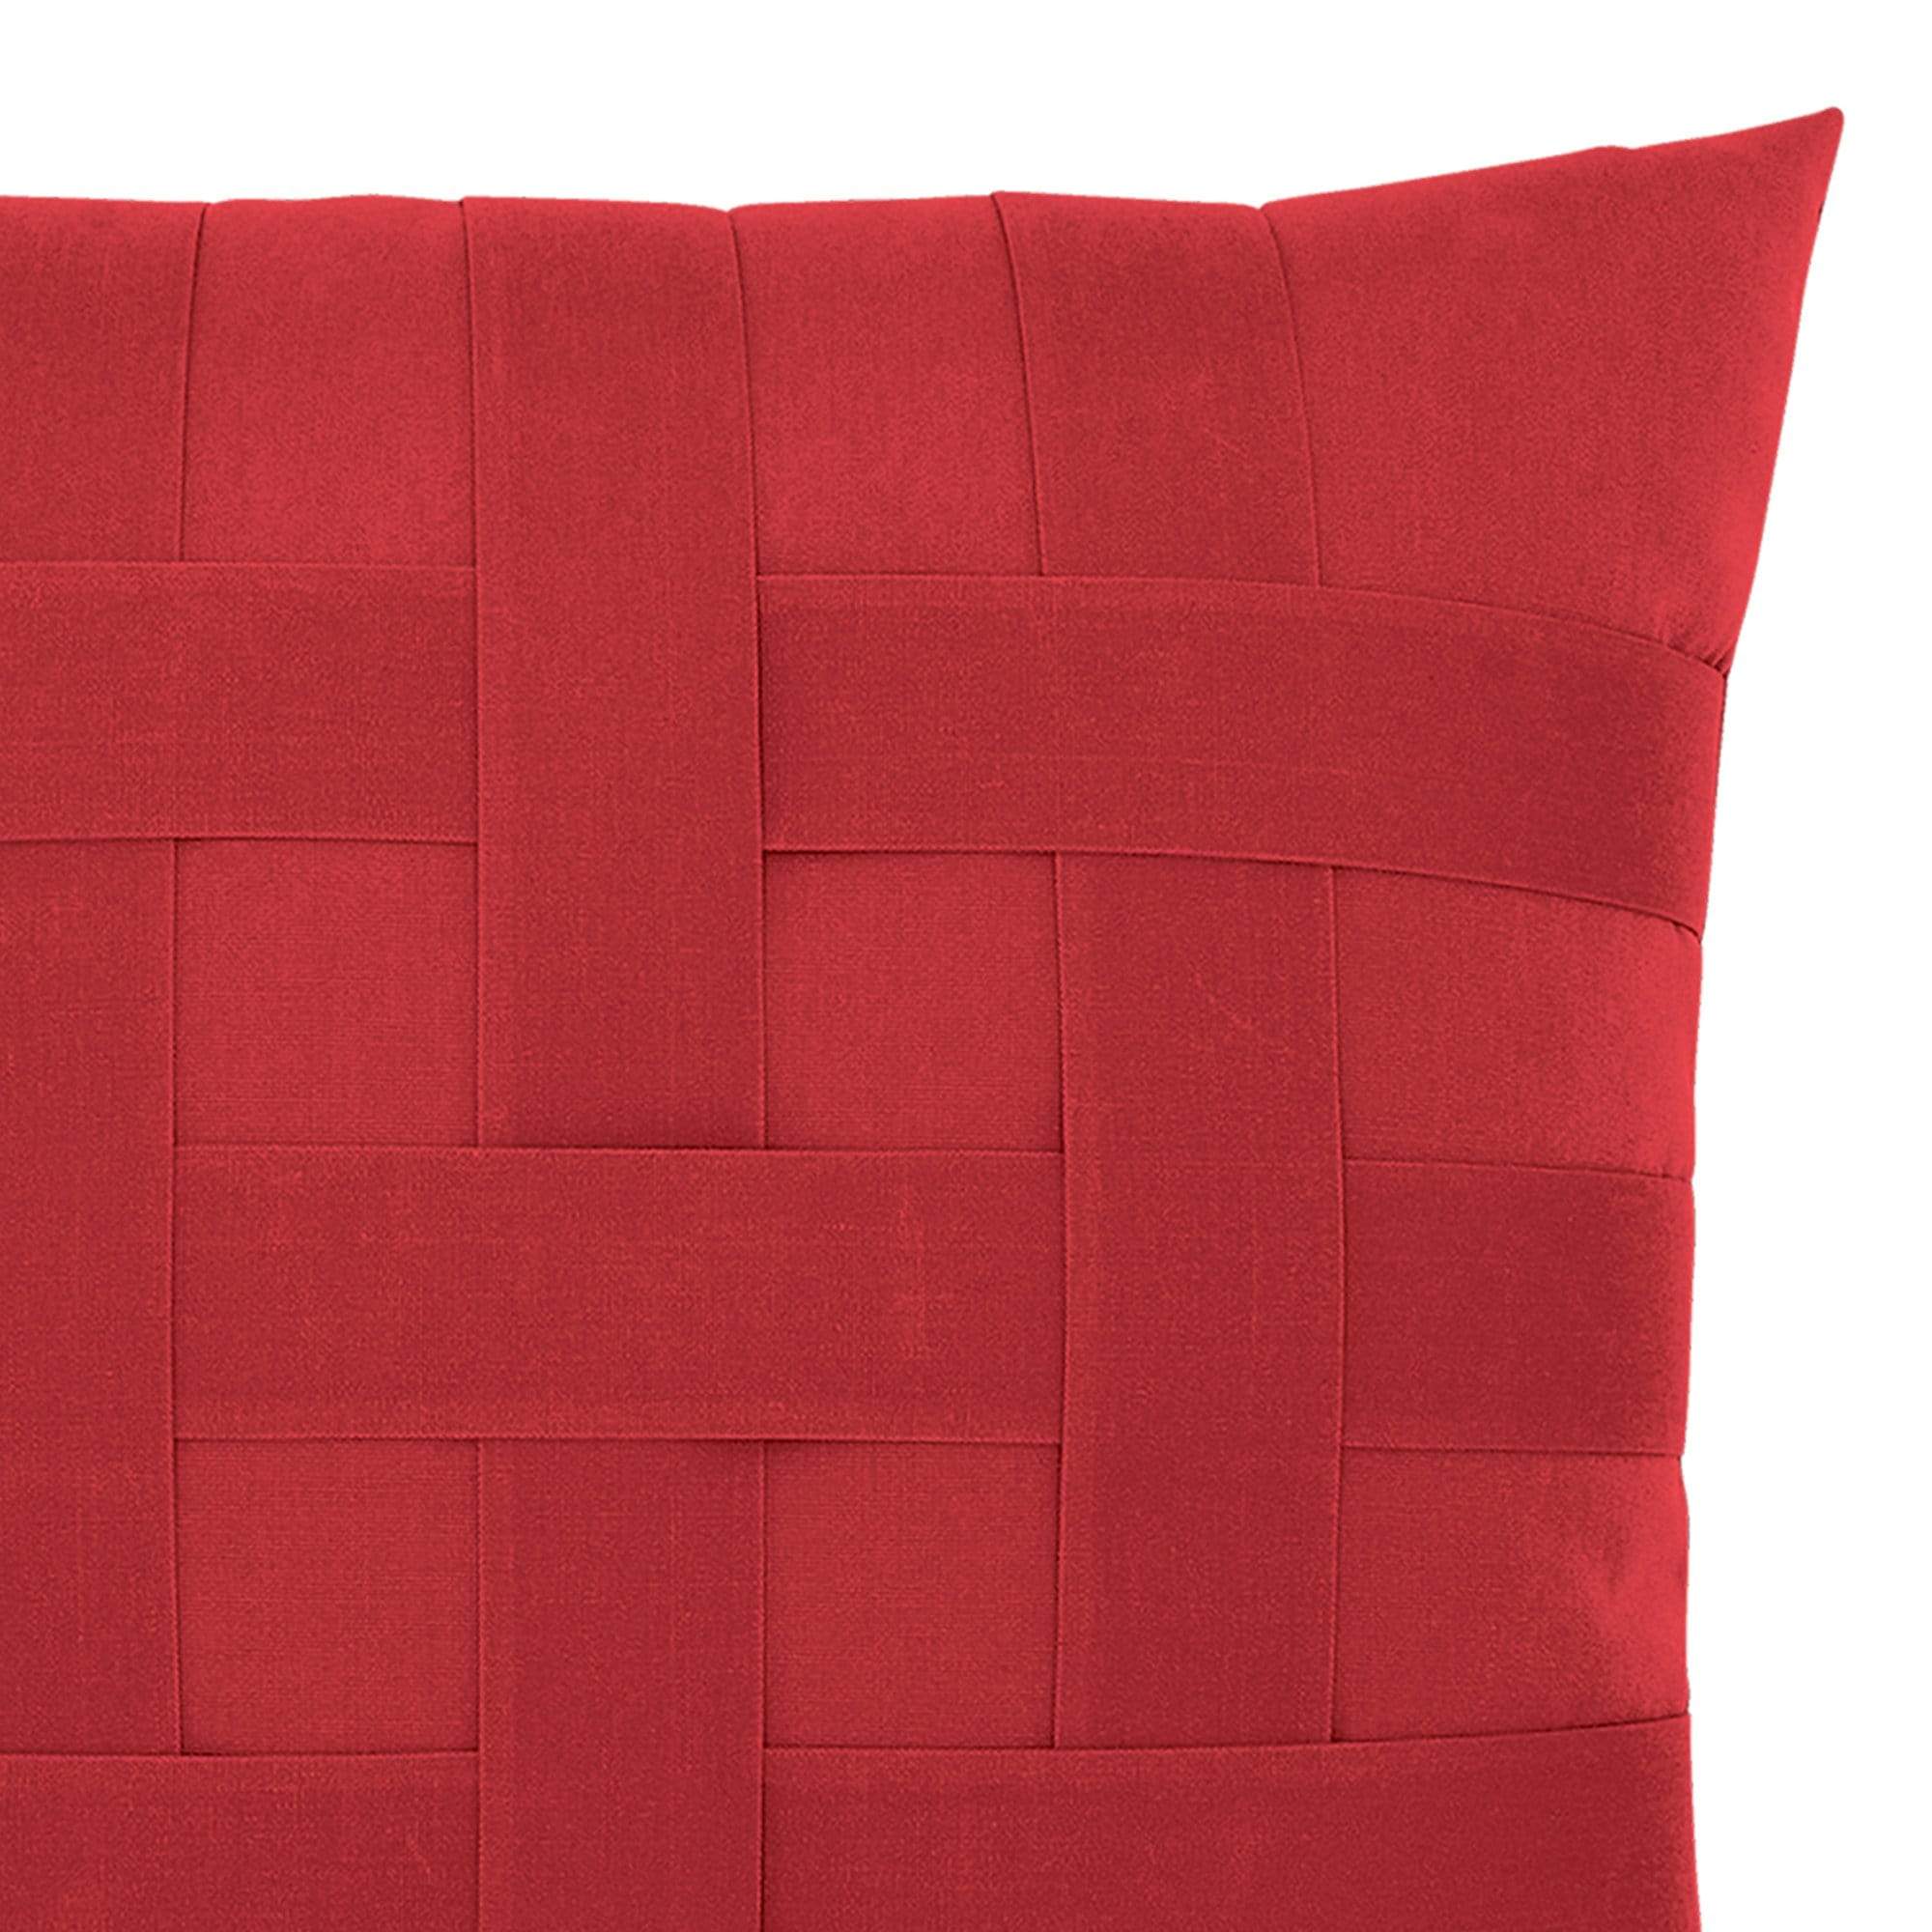 Rouge Pillow